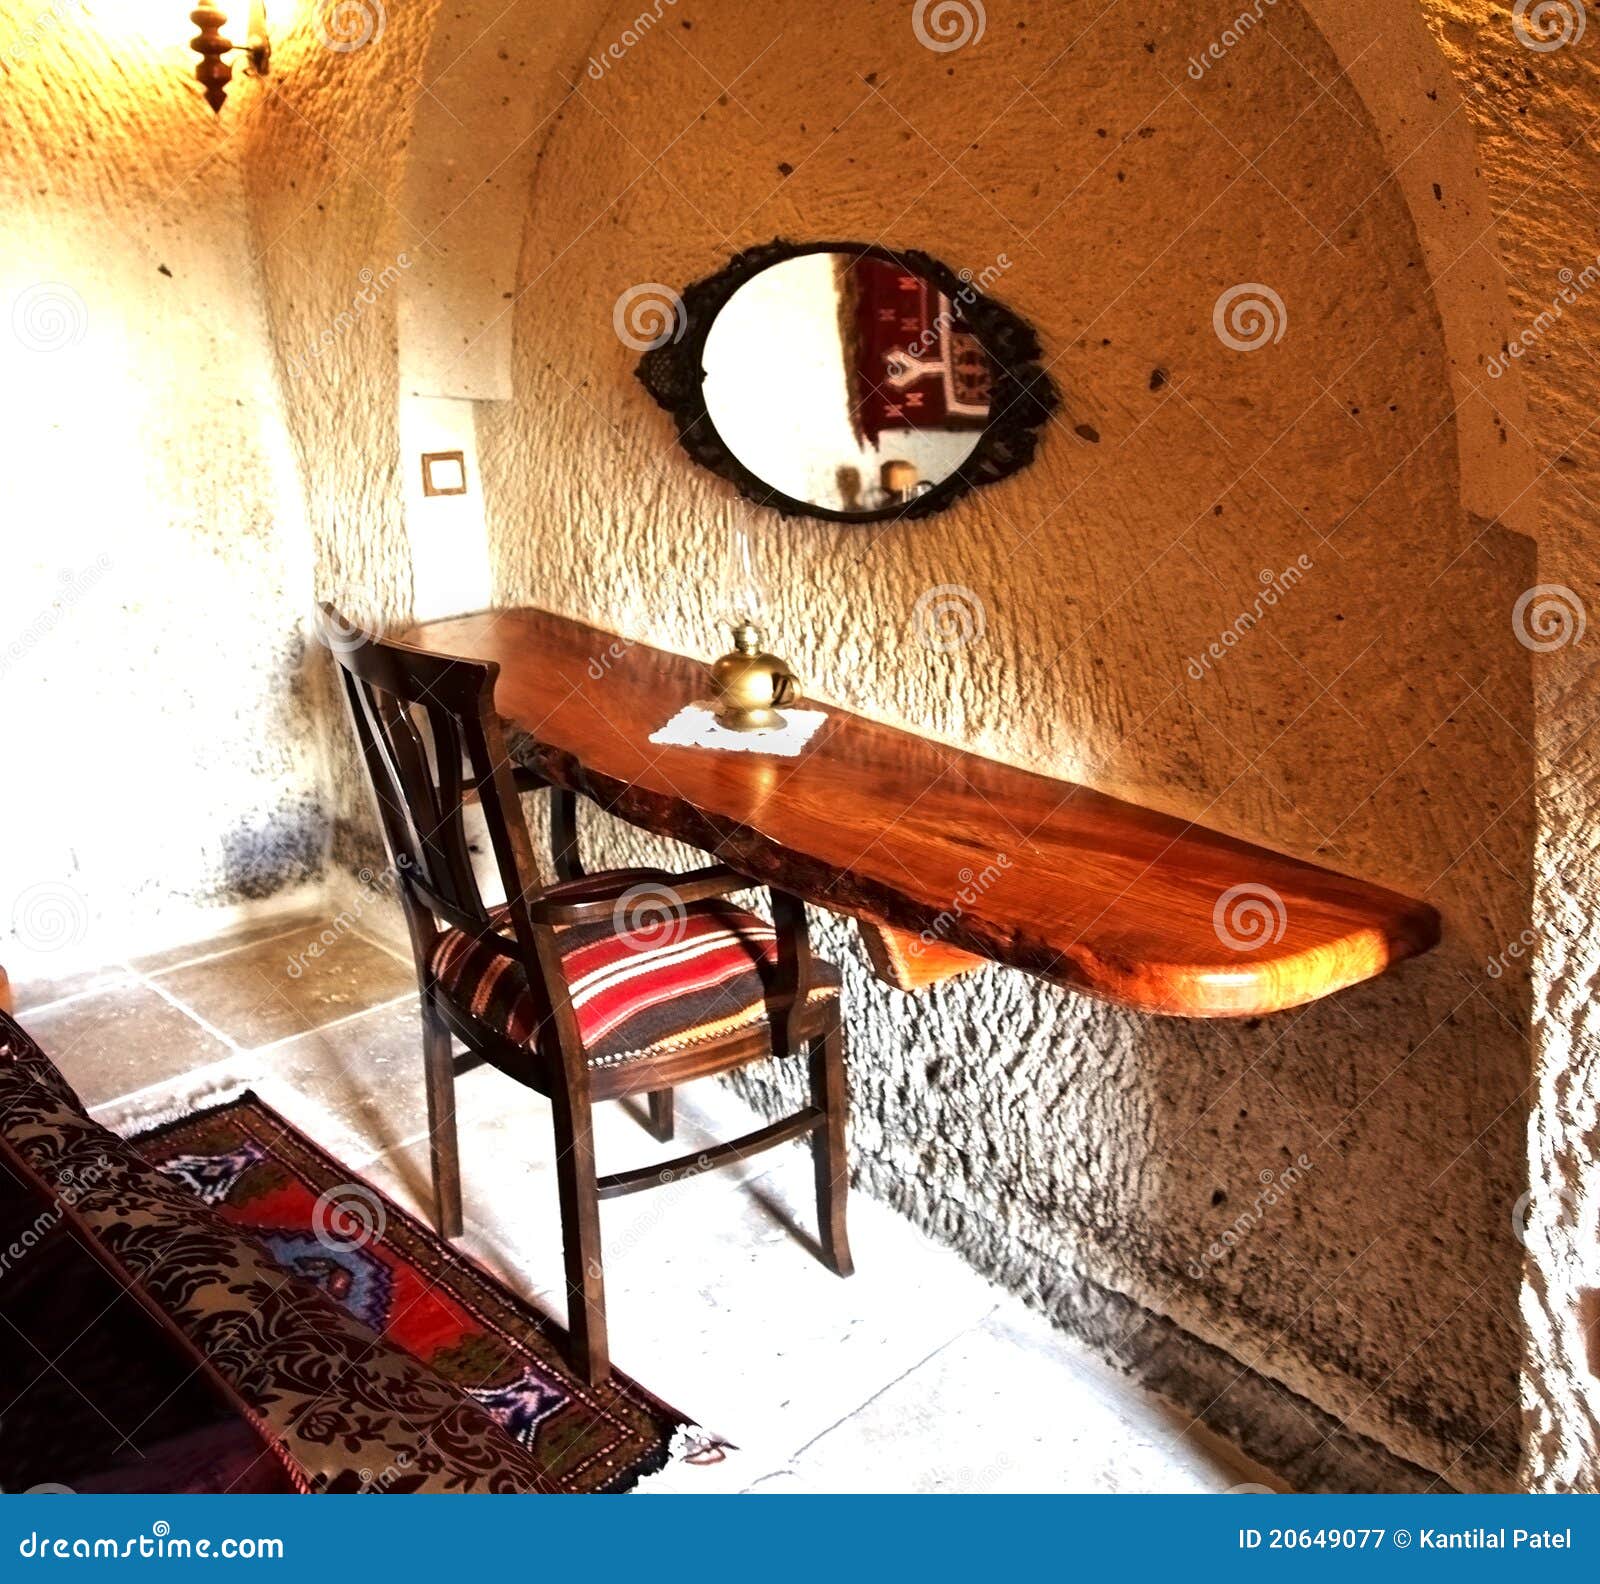 Turkish Interior Room With Chair And Desk Stock Image